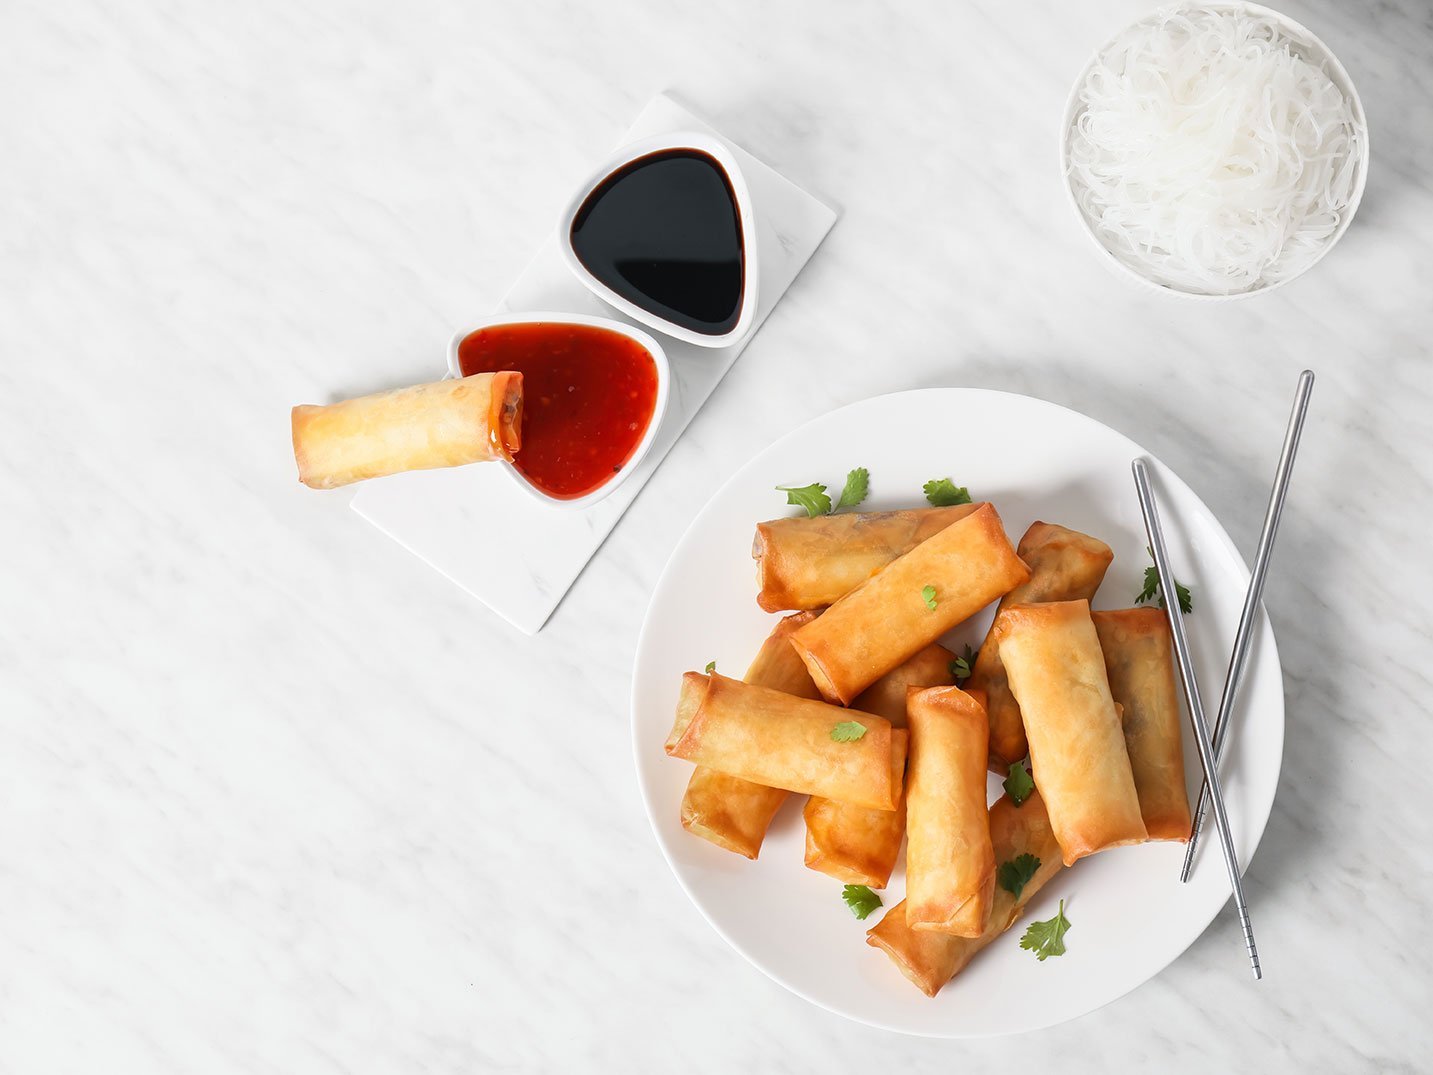 Plate With Tasty Fried Spring Rolls And Sauce On Light Backgroun